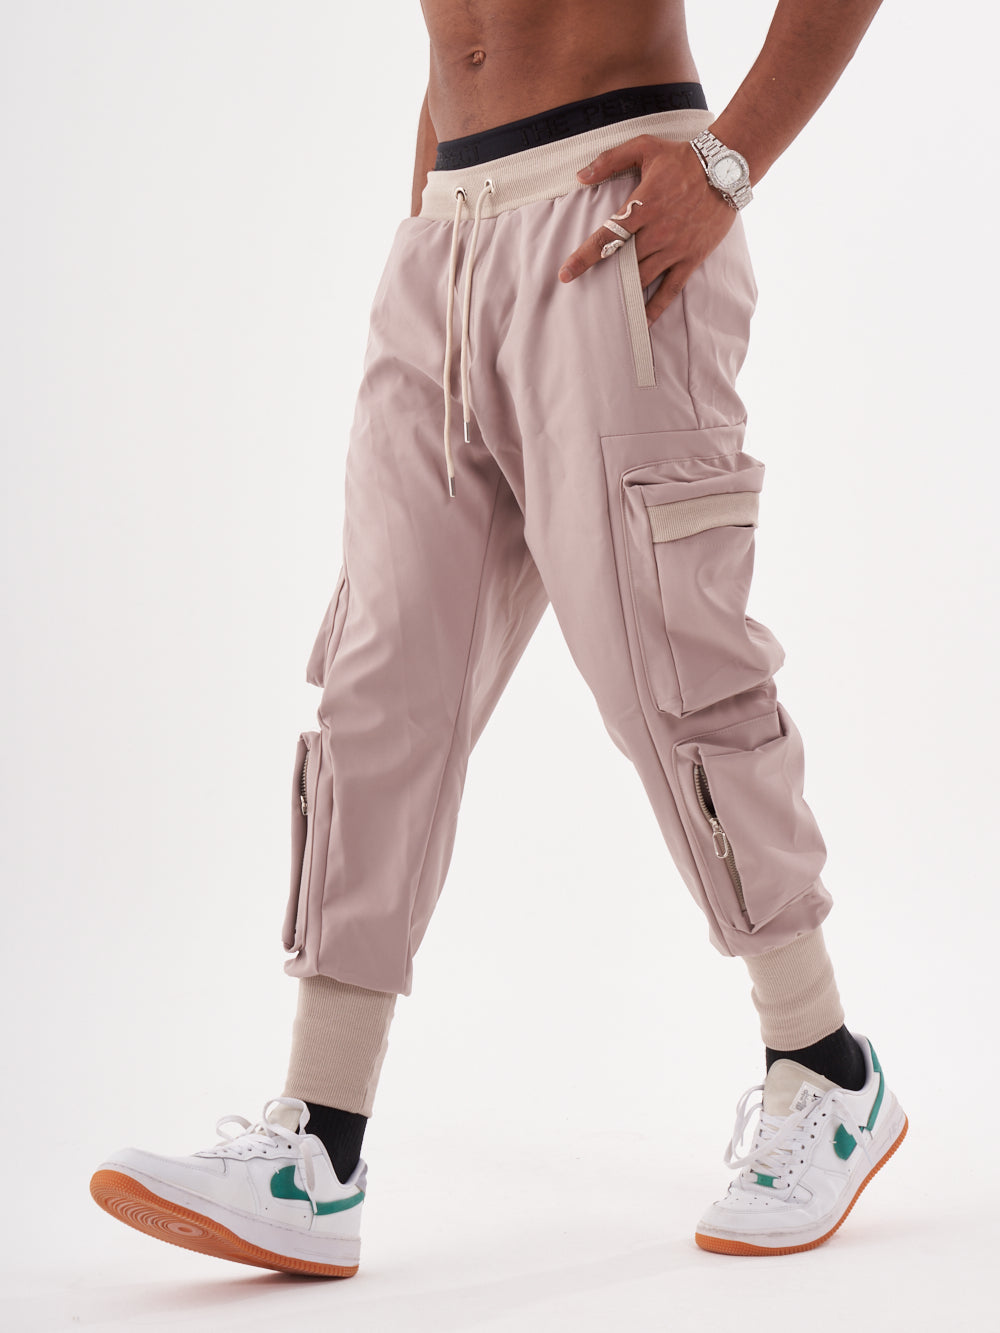 A man wearing OUTLIER | MAUVE cargo pants and sneakers.